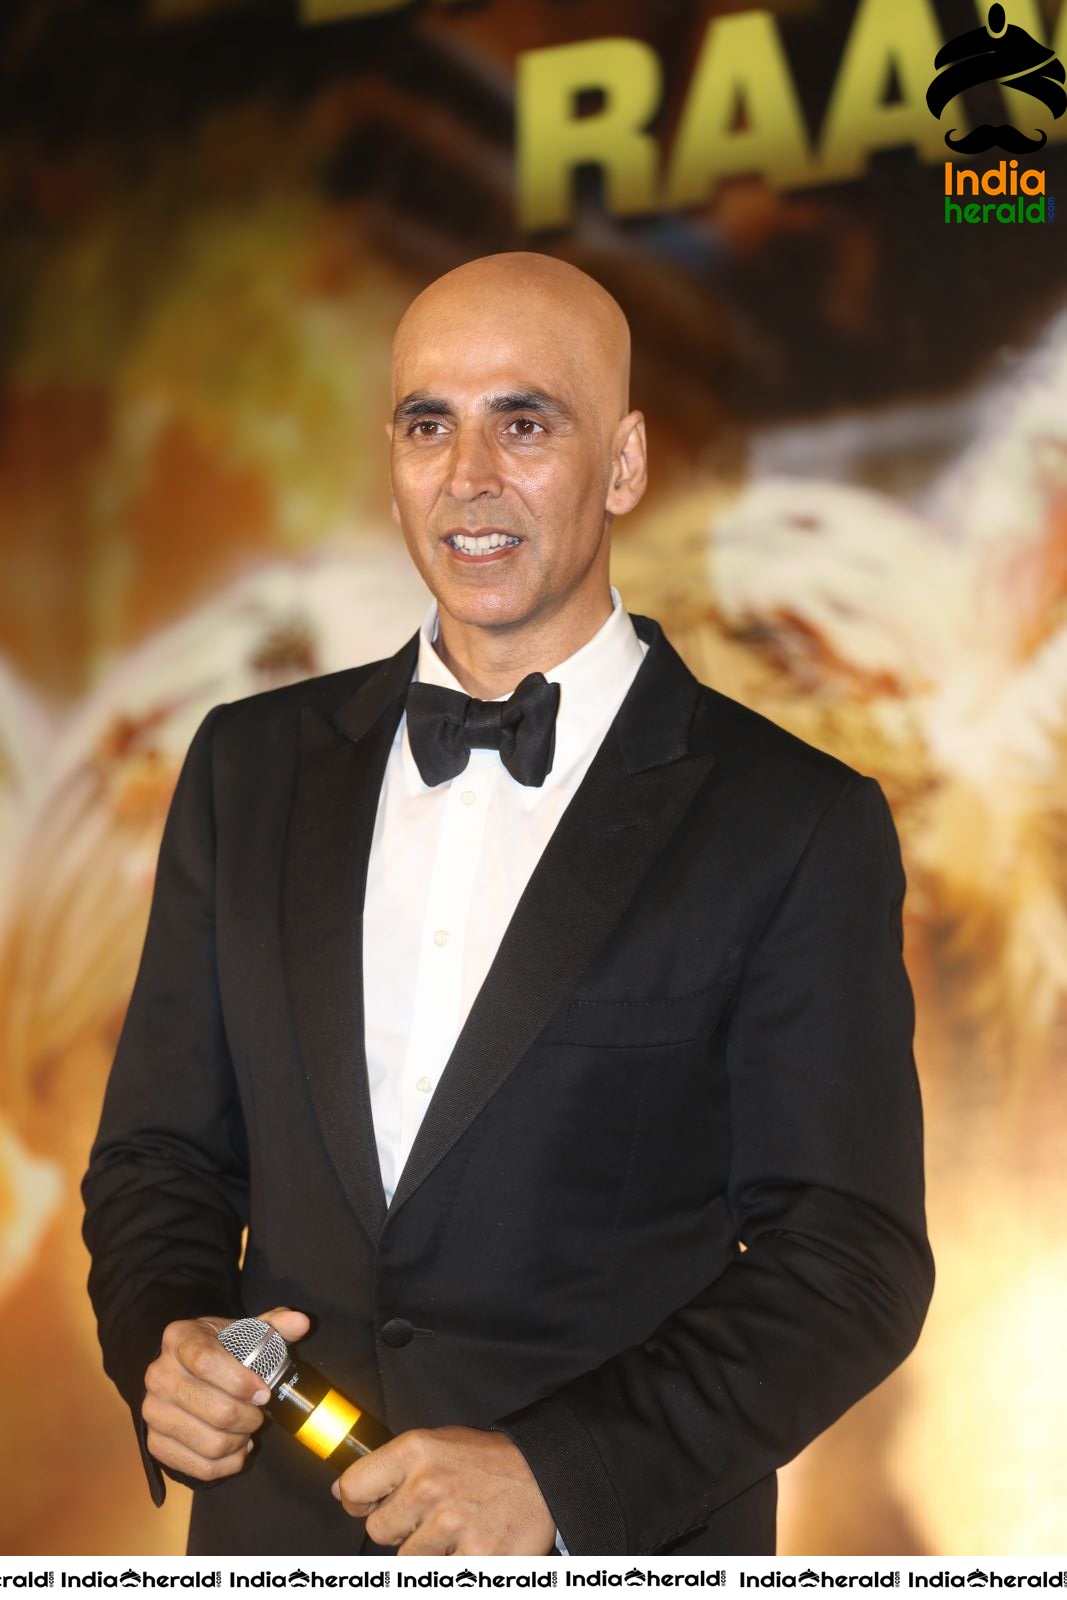 Akshay Kumar seen with Fully Tonsured Head at an event Set 2